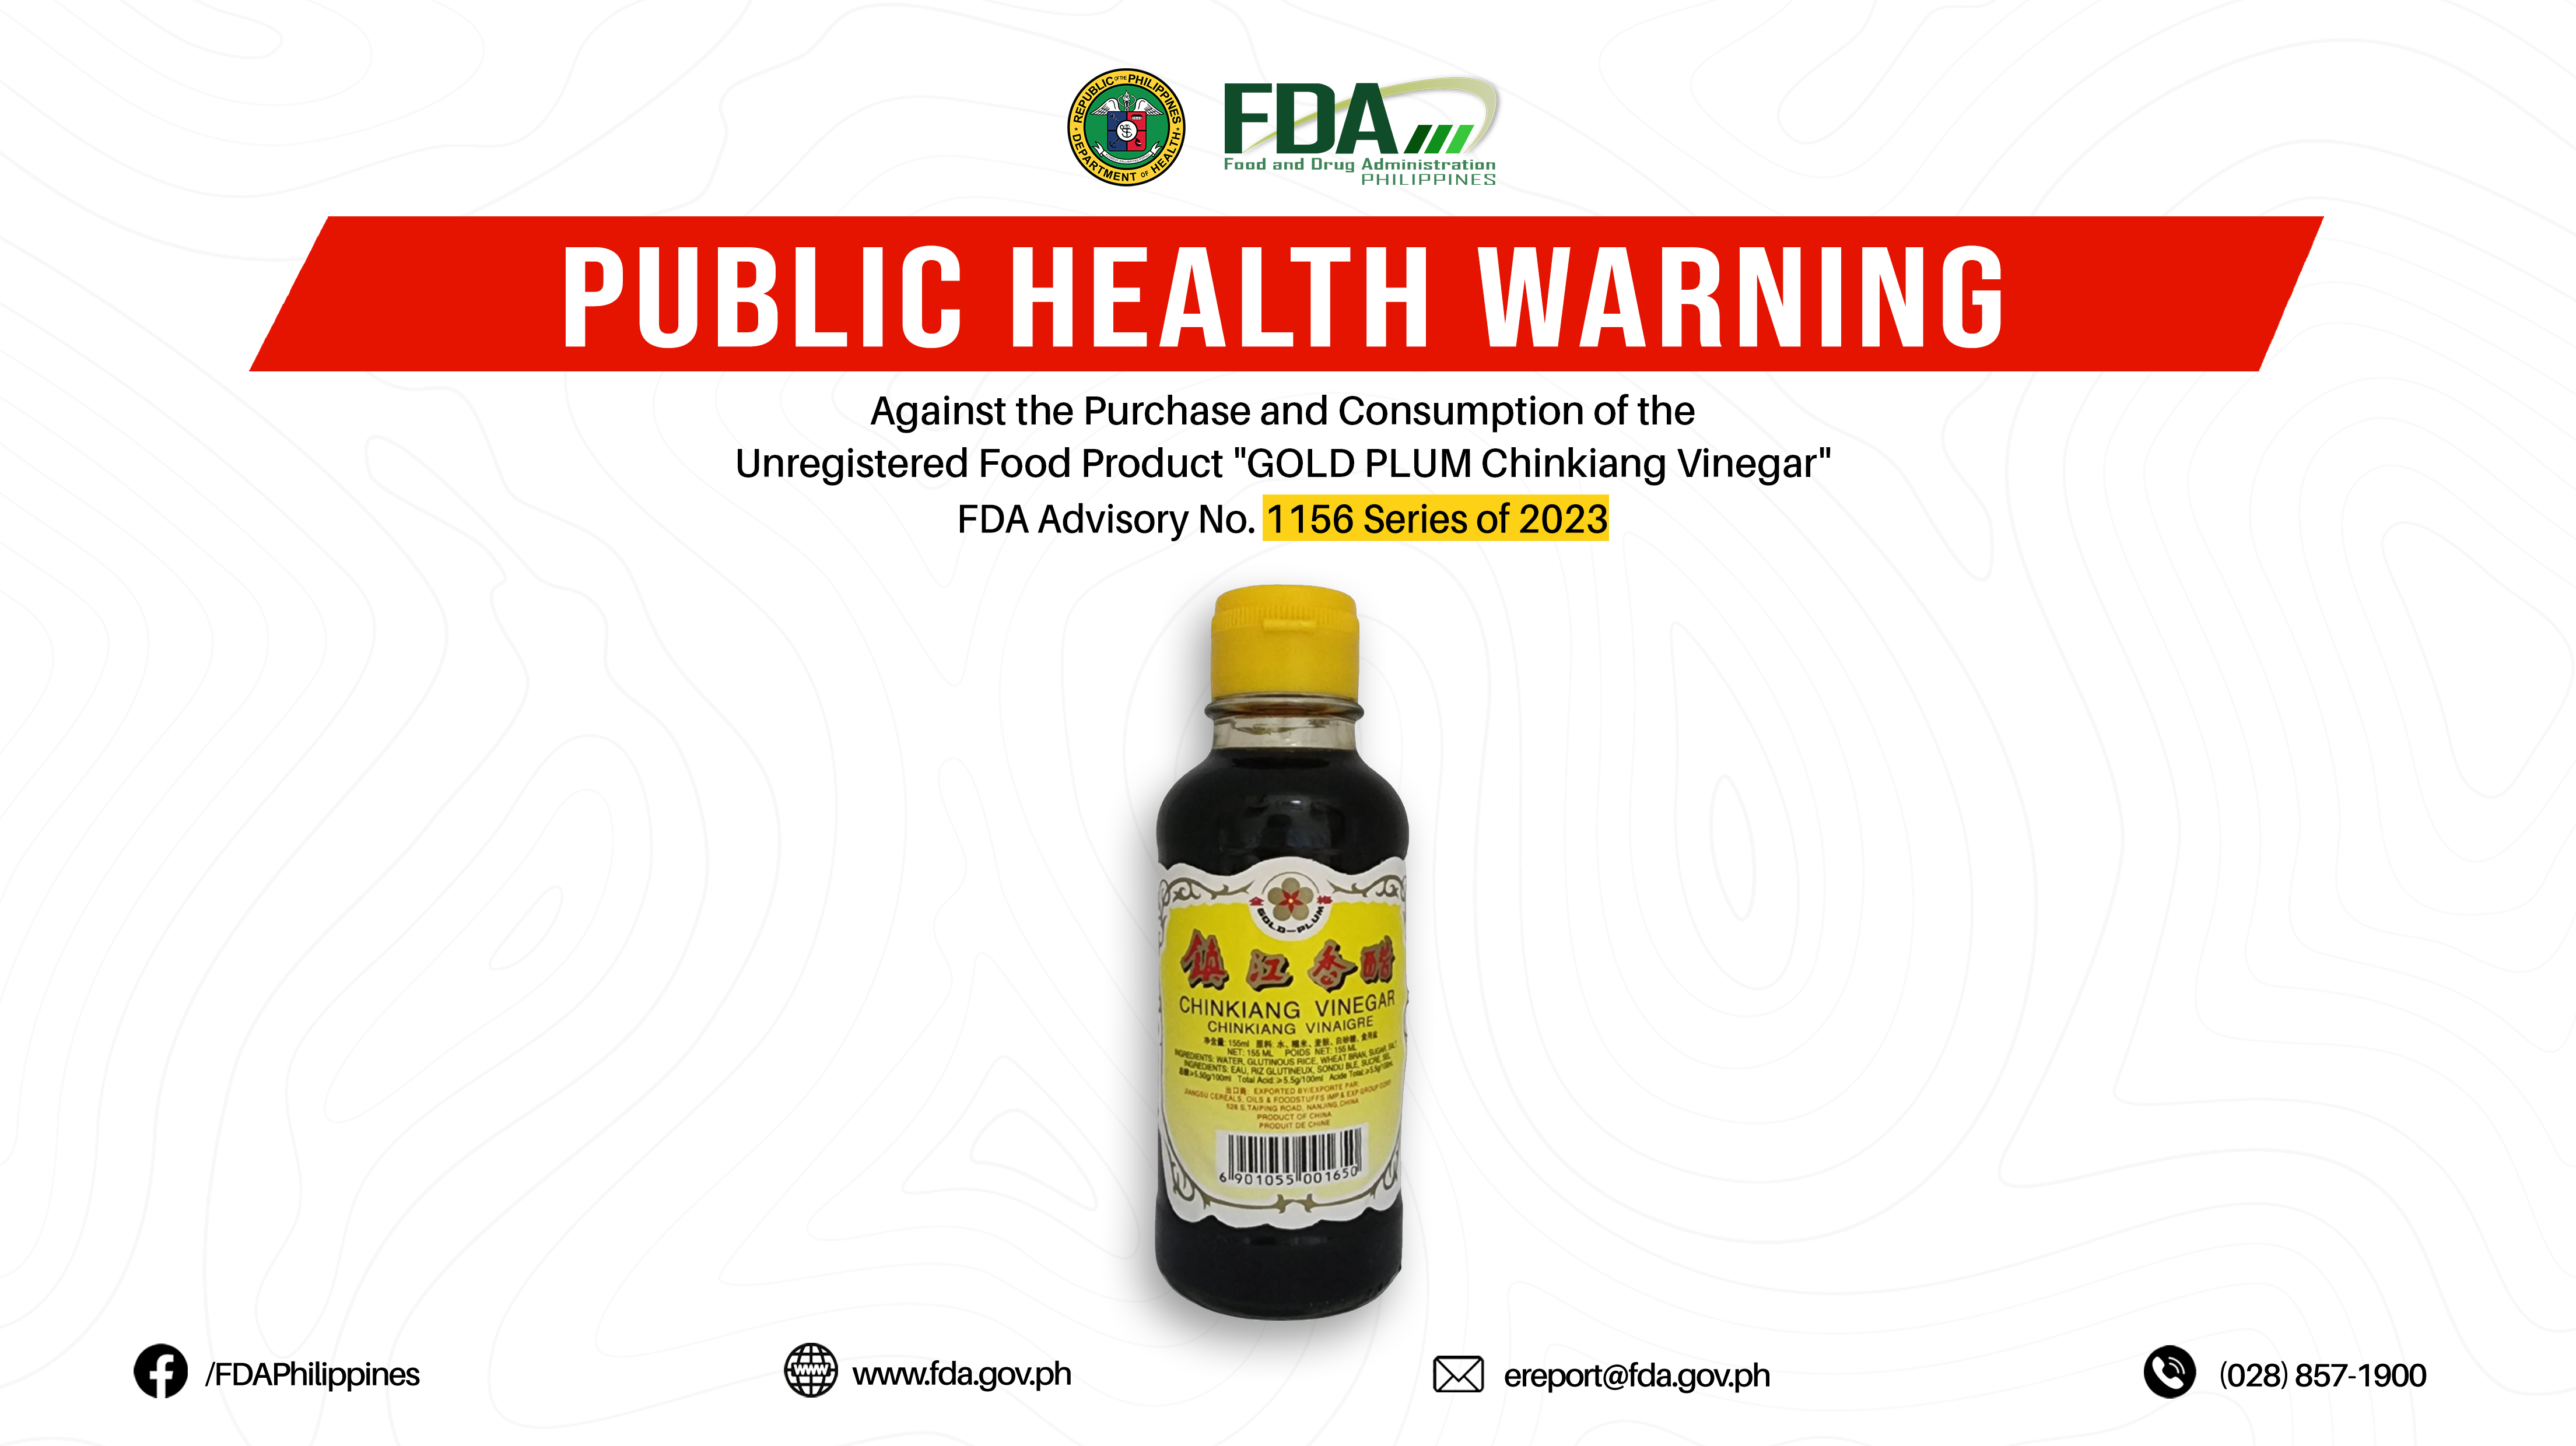 FDA Advisory No.2023-1156 || Public Health Warning Against the Purchase and Consumption of the Unregistered Food Product “GOLD PLUM Chinkiang Vinegar”